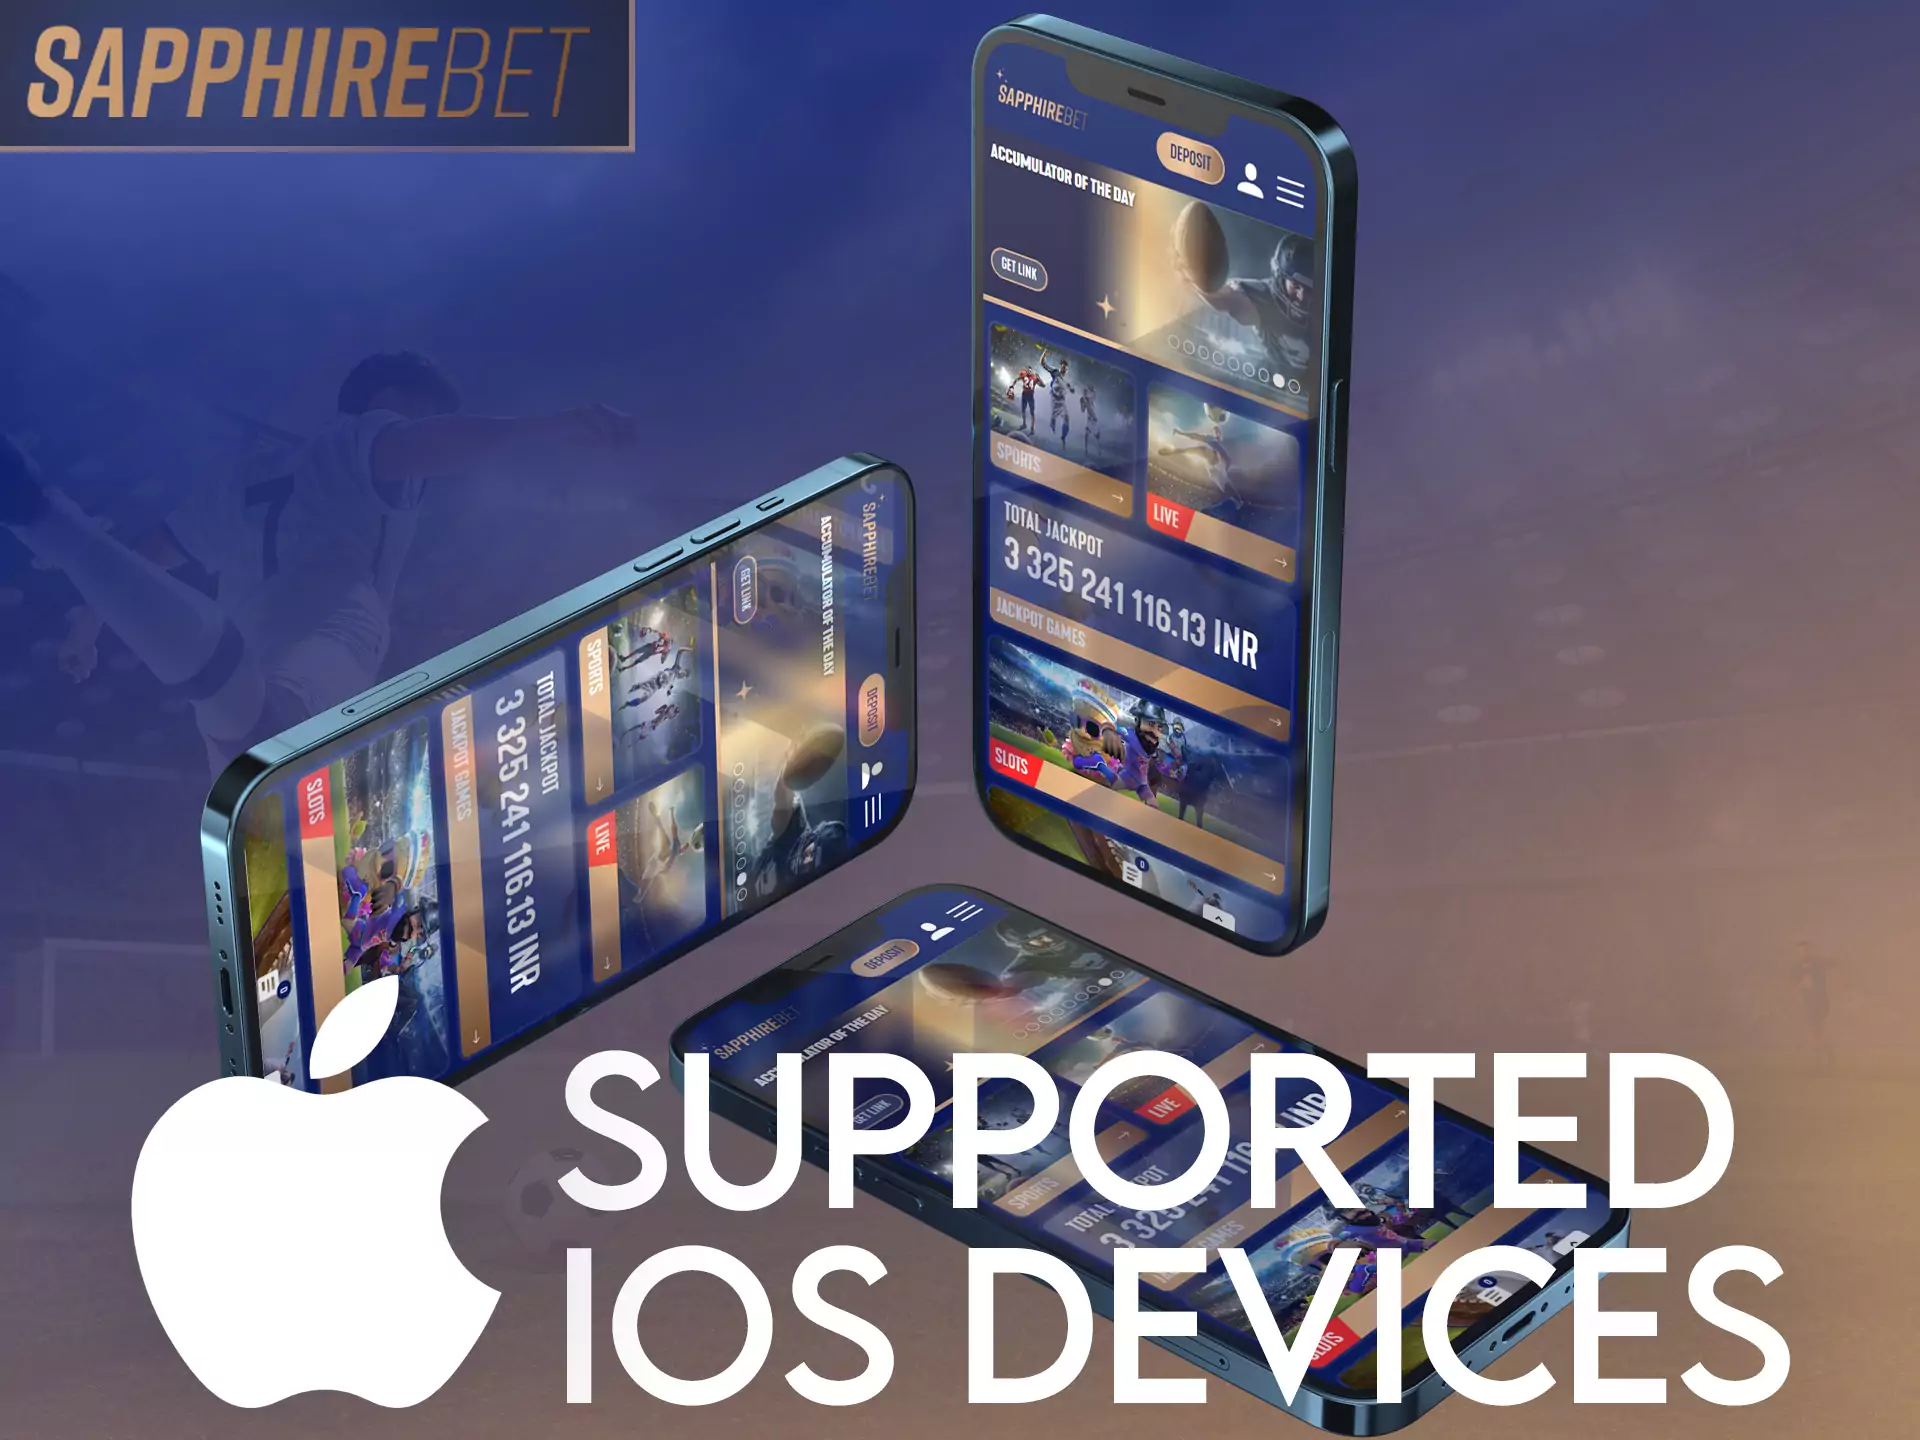 The Sapphirebet application is supported on different models of iOS devices.